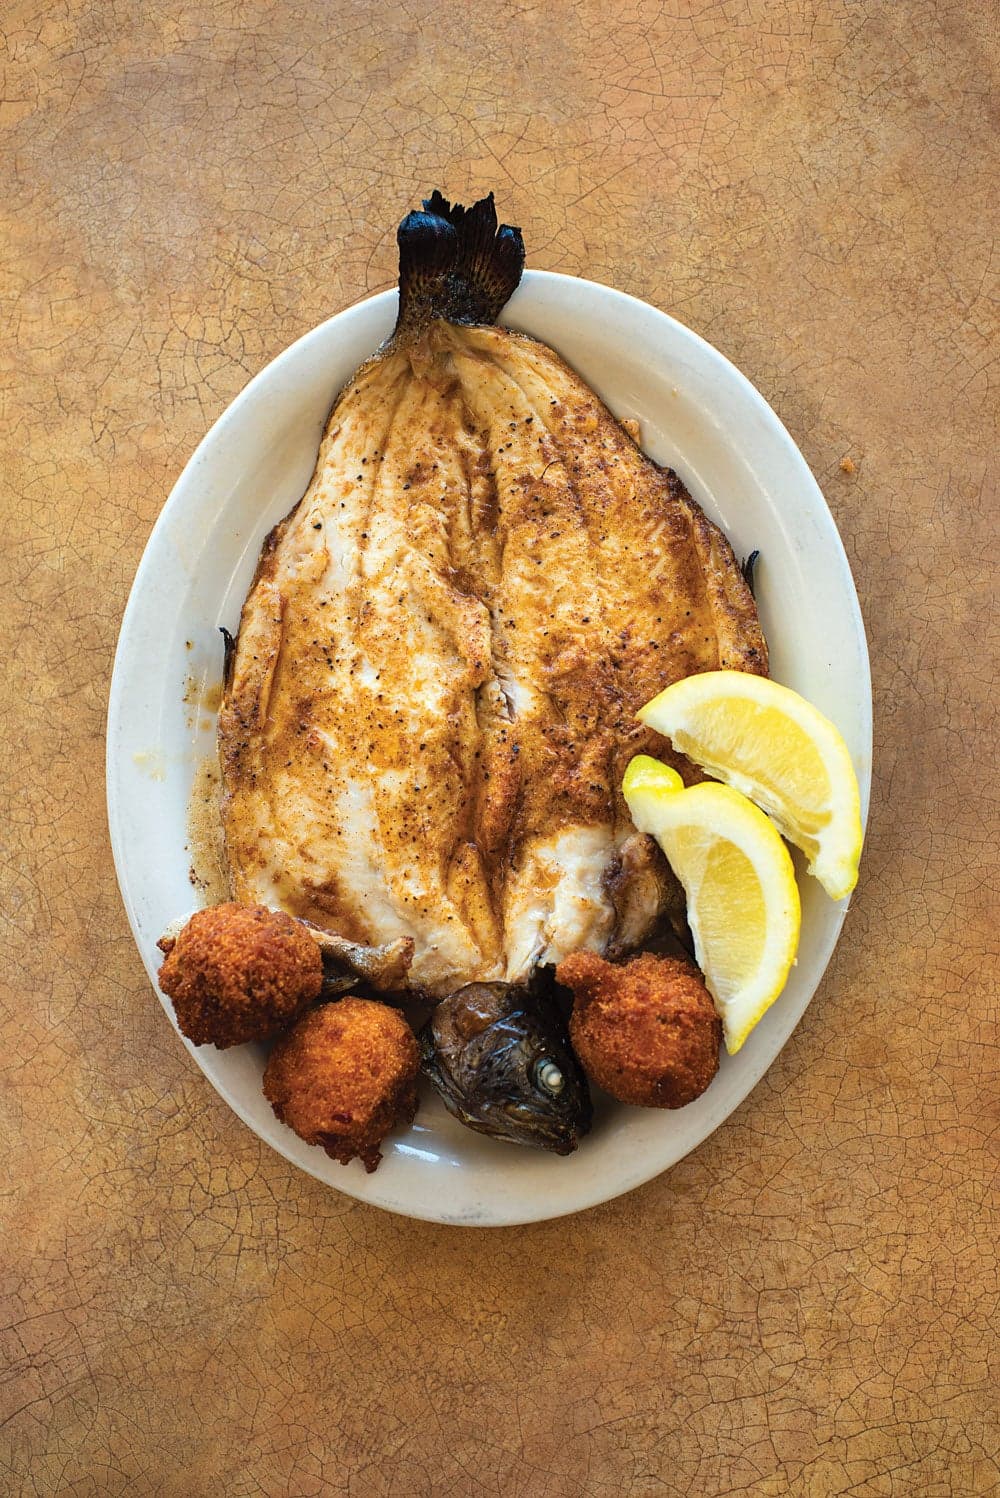 Broiled Rainbow Trout with Hush Puppies